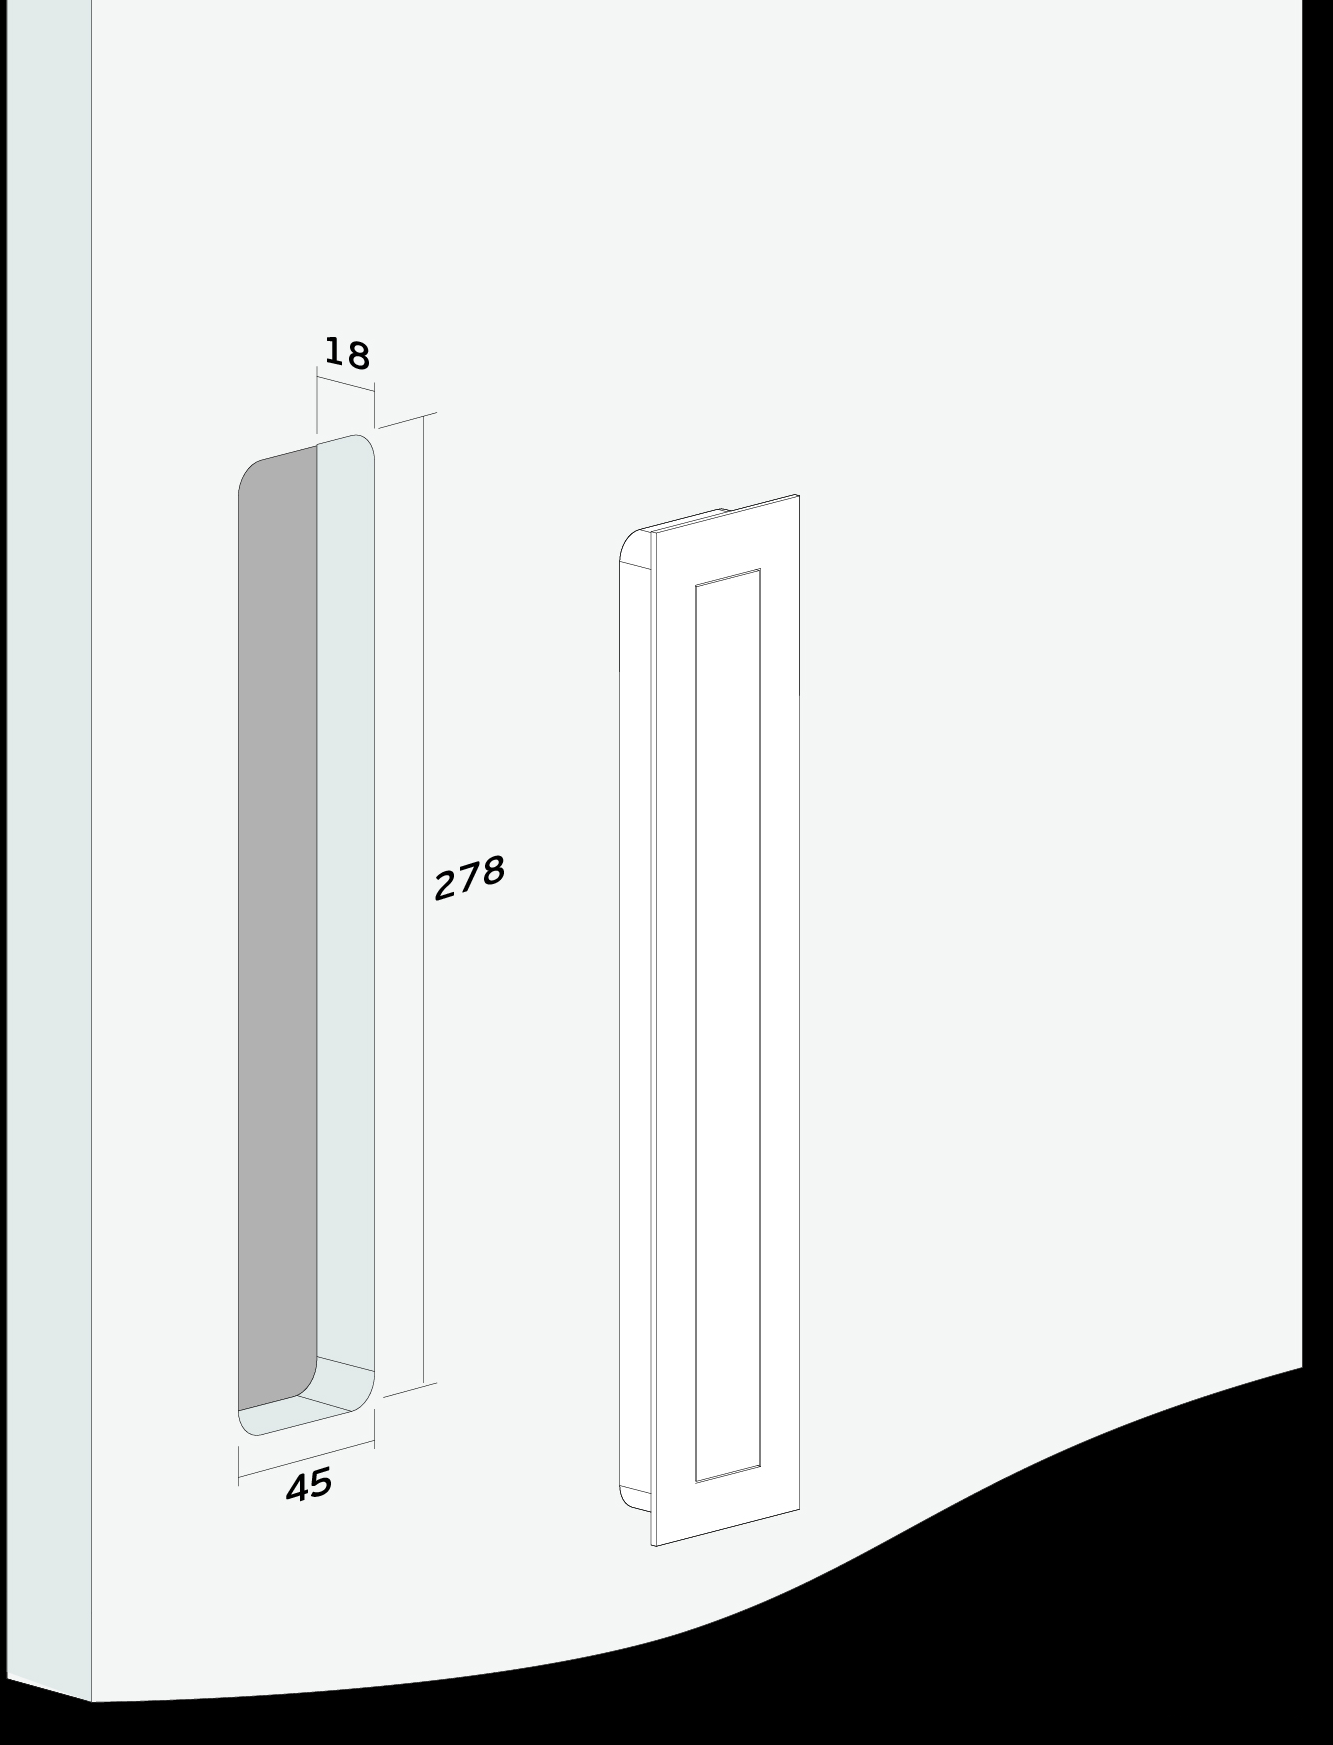 Drawing of a door with the cut out depth required to install the Antique Brass Flush Pull 300mm by Architectural Choice.